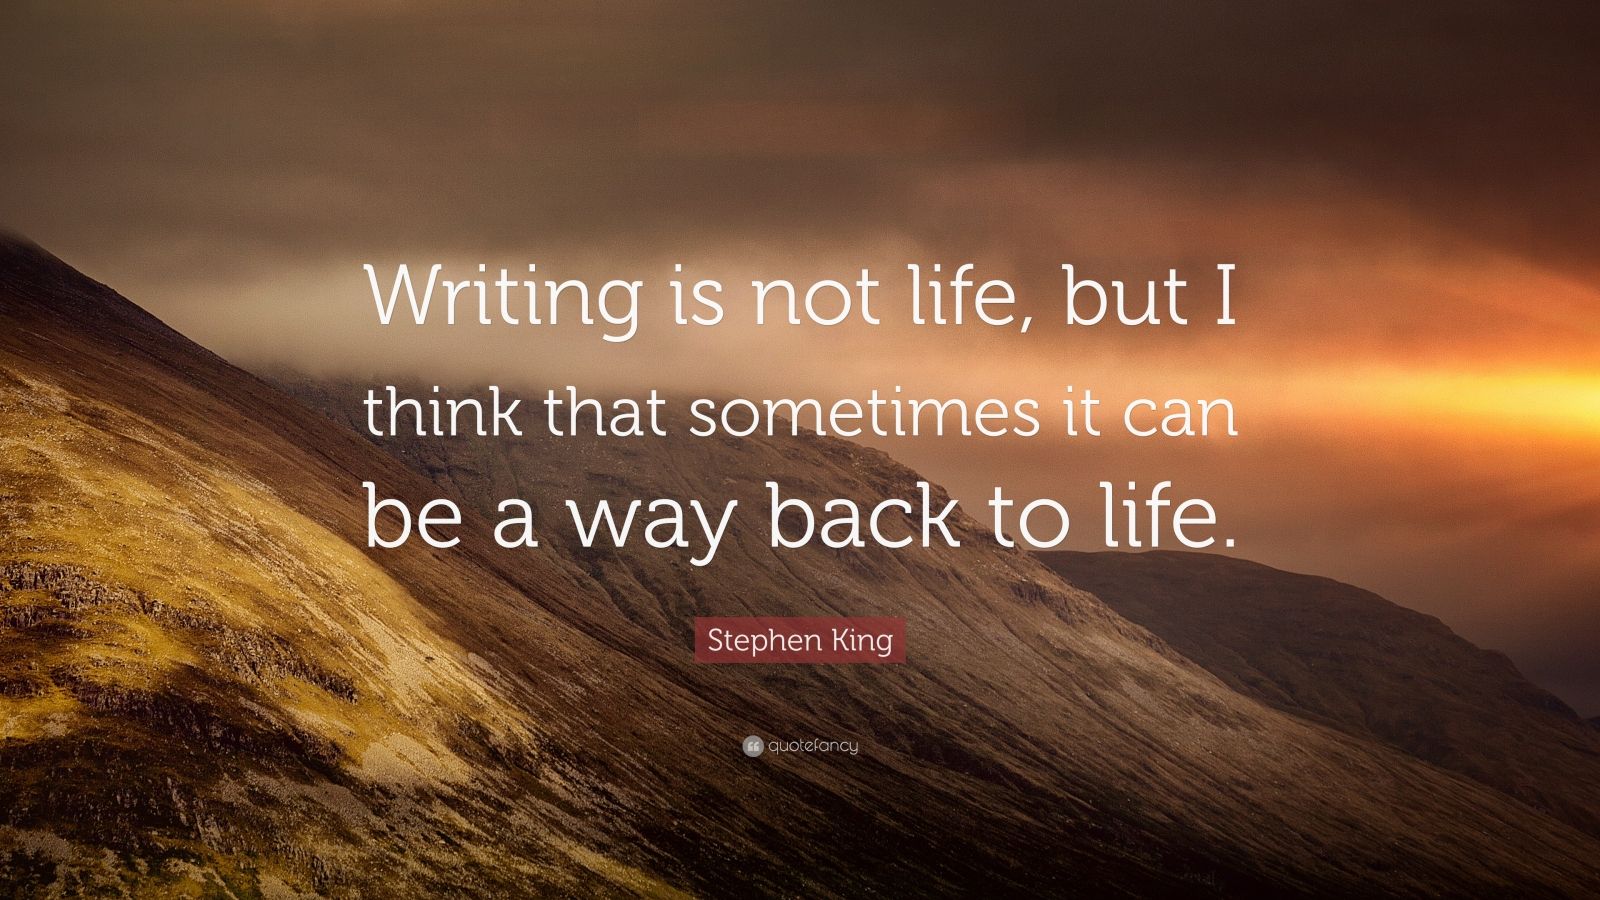 Stephen King Quote: “Writing is not life, but I think that sometimes it